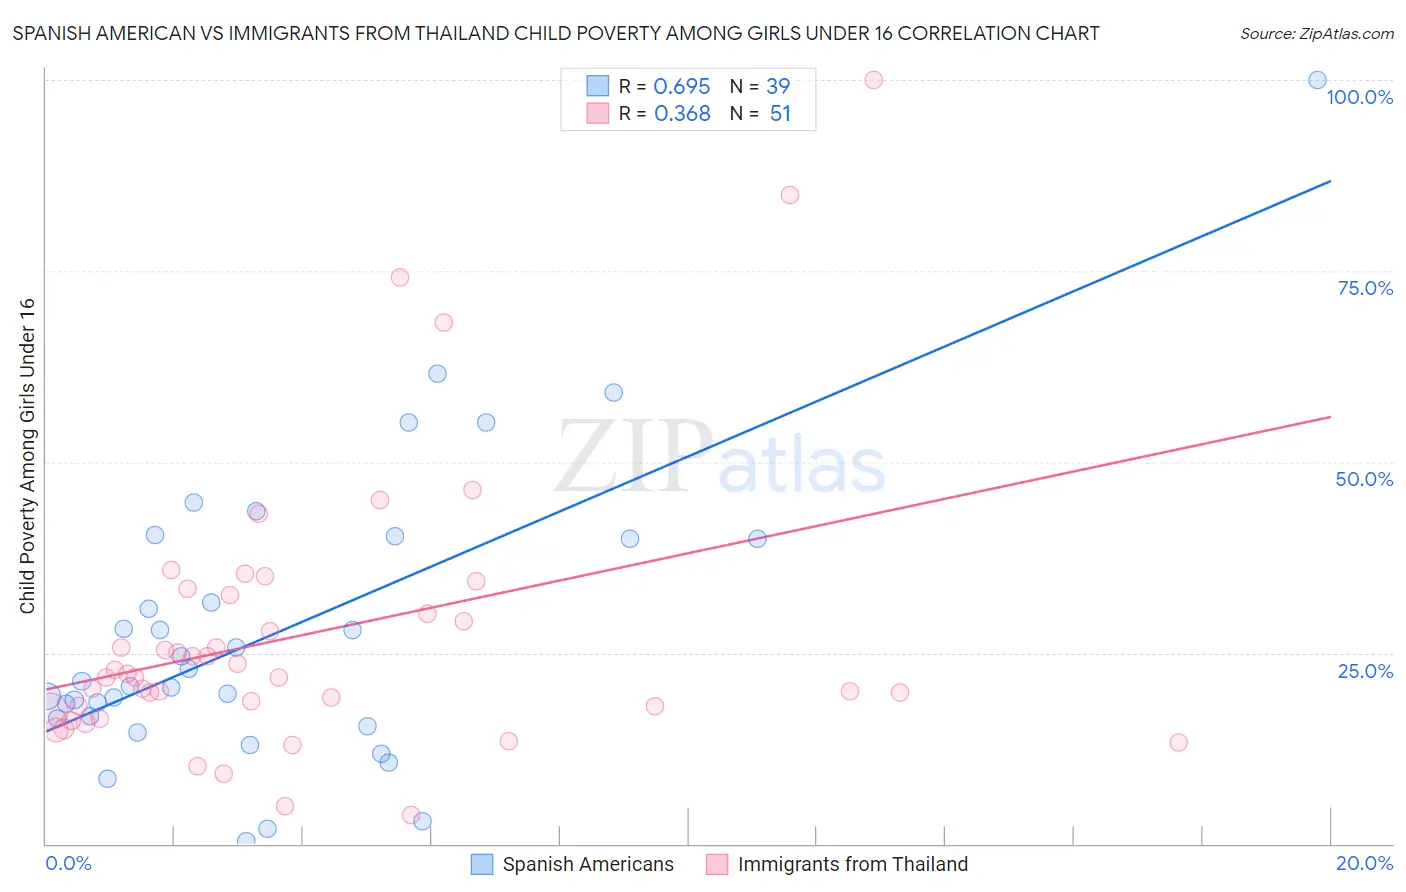 Spanish American vs Immigrants from Thailand Child Poverty Among Girls Under 16